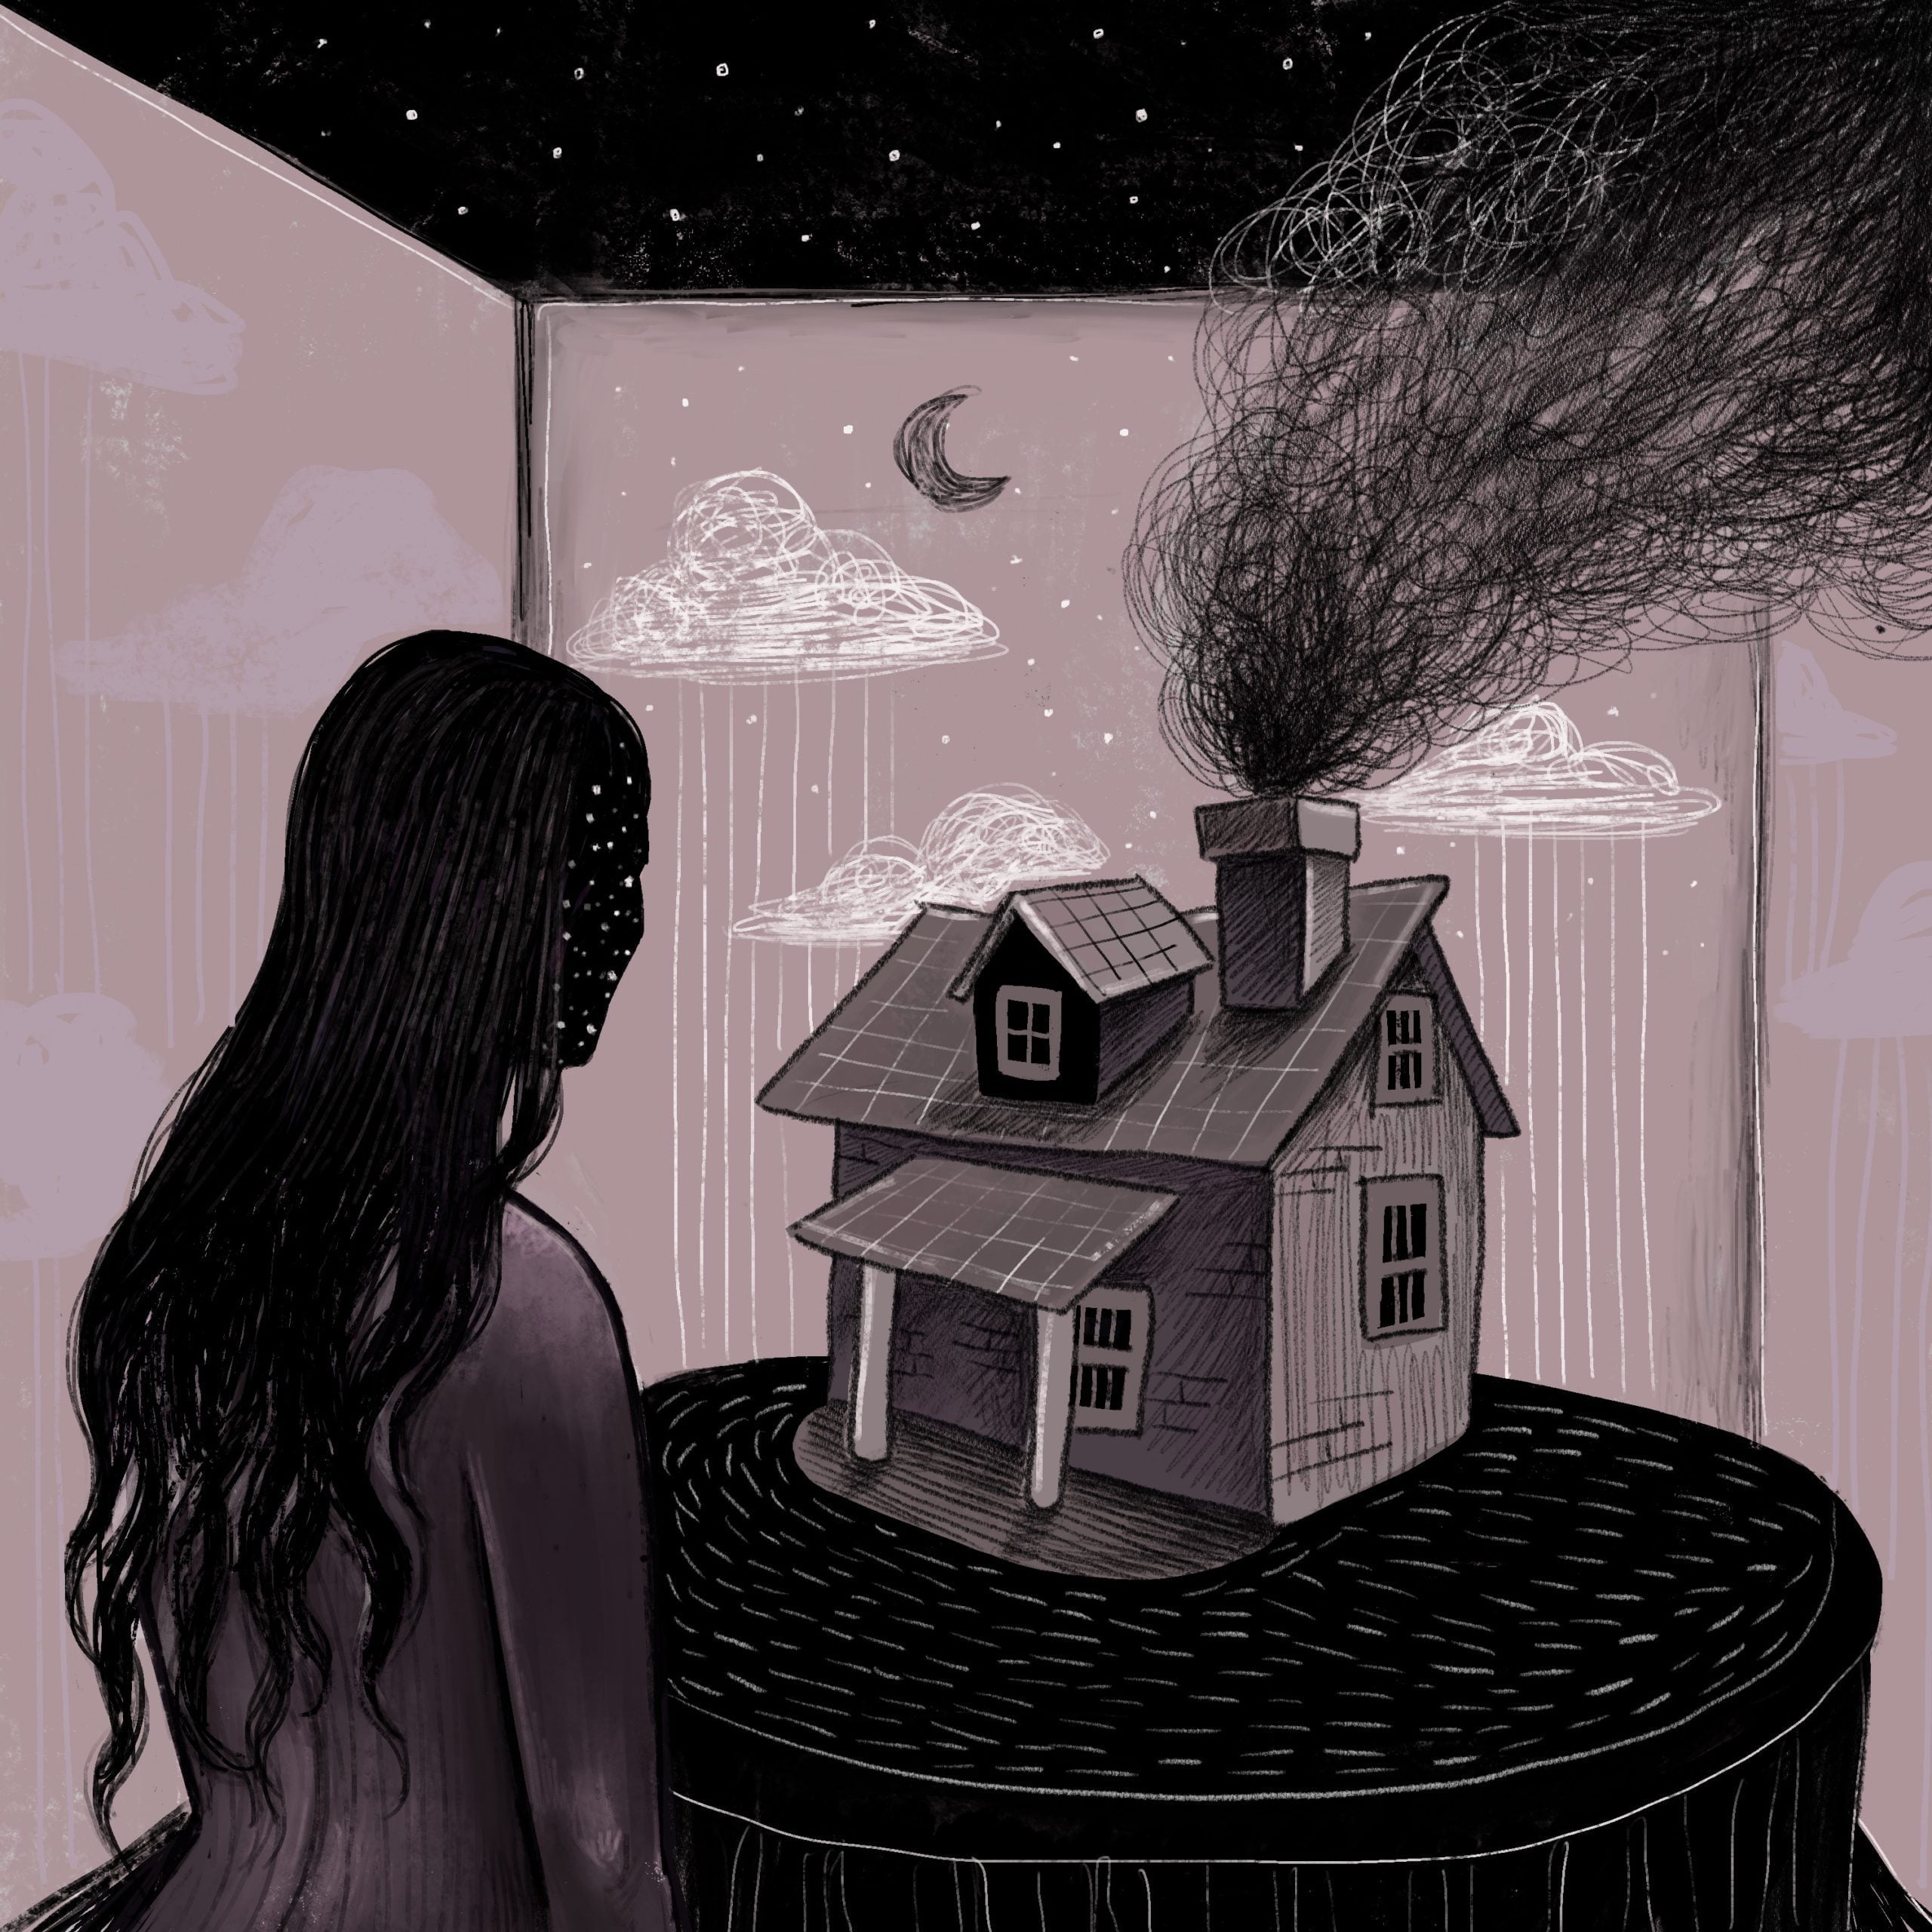 She stood in front of the tri-fold board, a science fair display of yore. A scrawl of clouds and rain, an interjection of her present state on the pitch black dreamscape beyond. She peered at the house with its porch and chimney billowing scribbled smoke. Her face had been erased, becoming the night, with a twinkling smattering of stars. The house was doll sized, placed upon a shaded stump, it seemed to be on display. Perhaps because she couldn’t fit in it, she was abandoned.